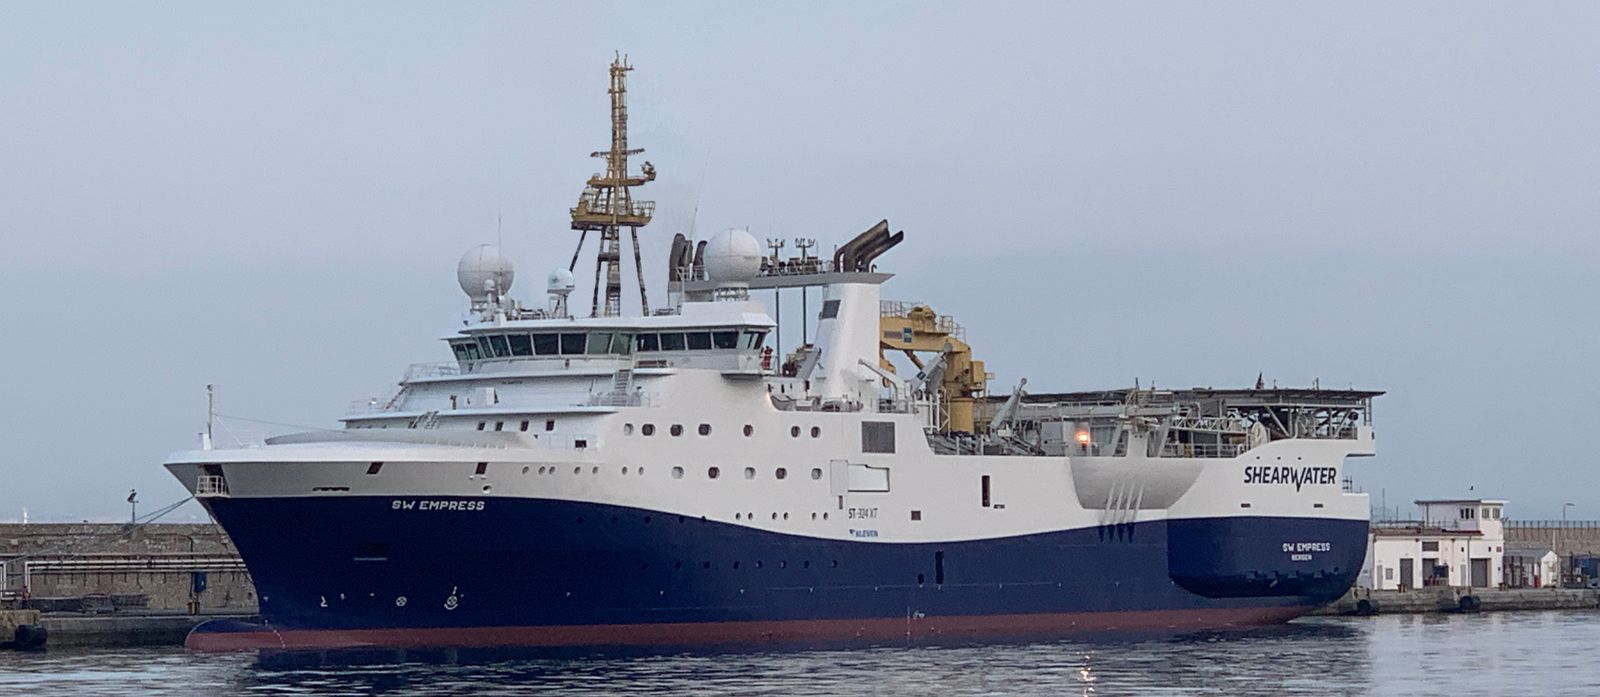 ​SW Empress vessel; Source: Shearwater GeoServices